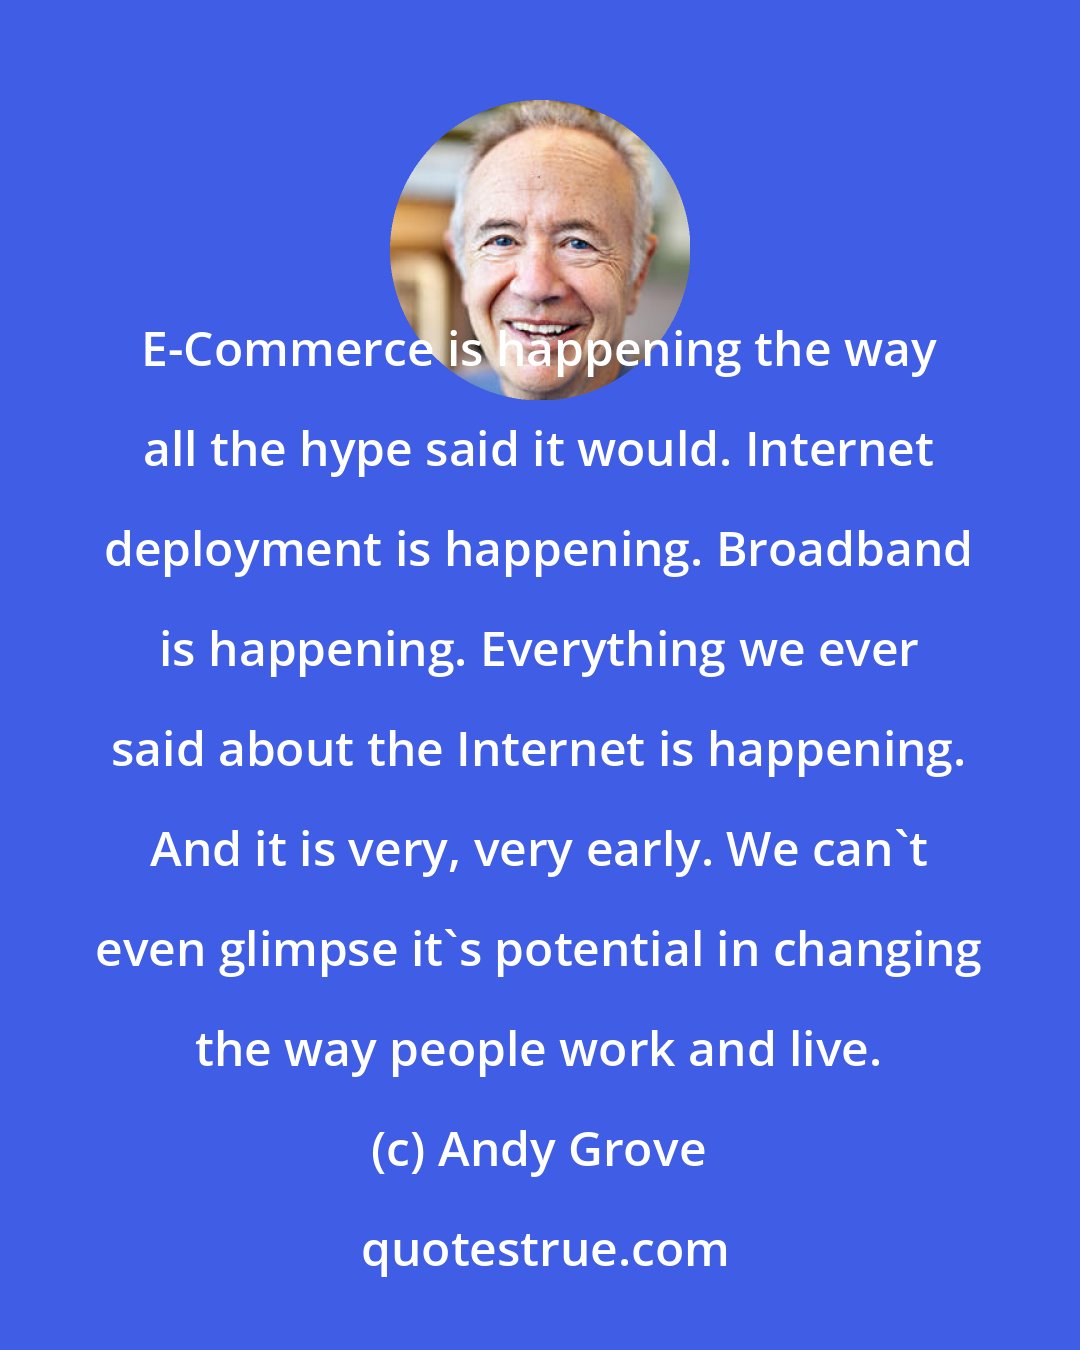 Andy Grove: E-Commerce is happening the way all the hype said it would. Internet deployment is happening. Broadband is happening. Everything we ever said about the Internet is happening. And it is very, very early. We can't even glimpse it's potential in changing the way people work and live.